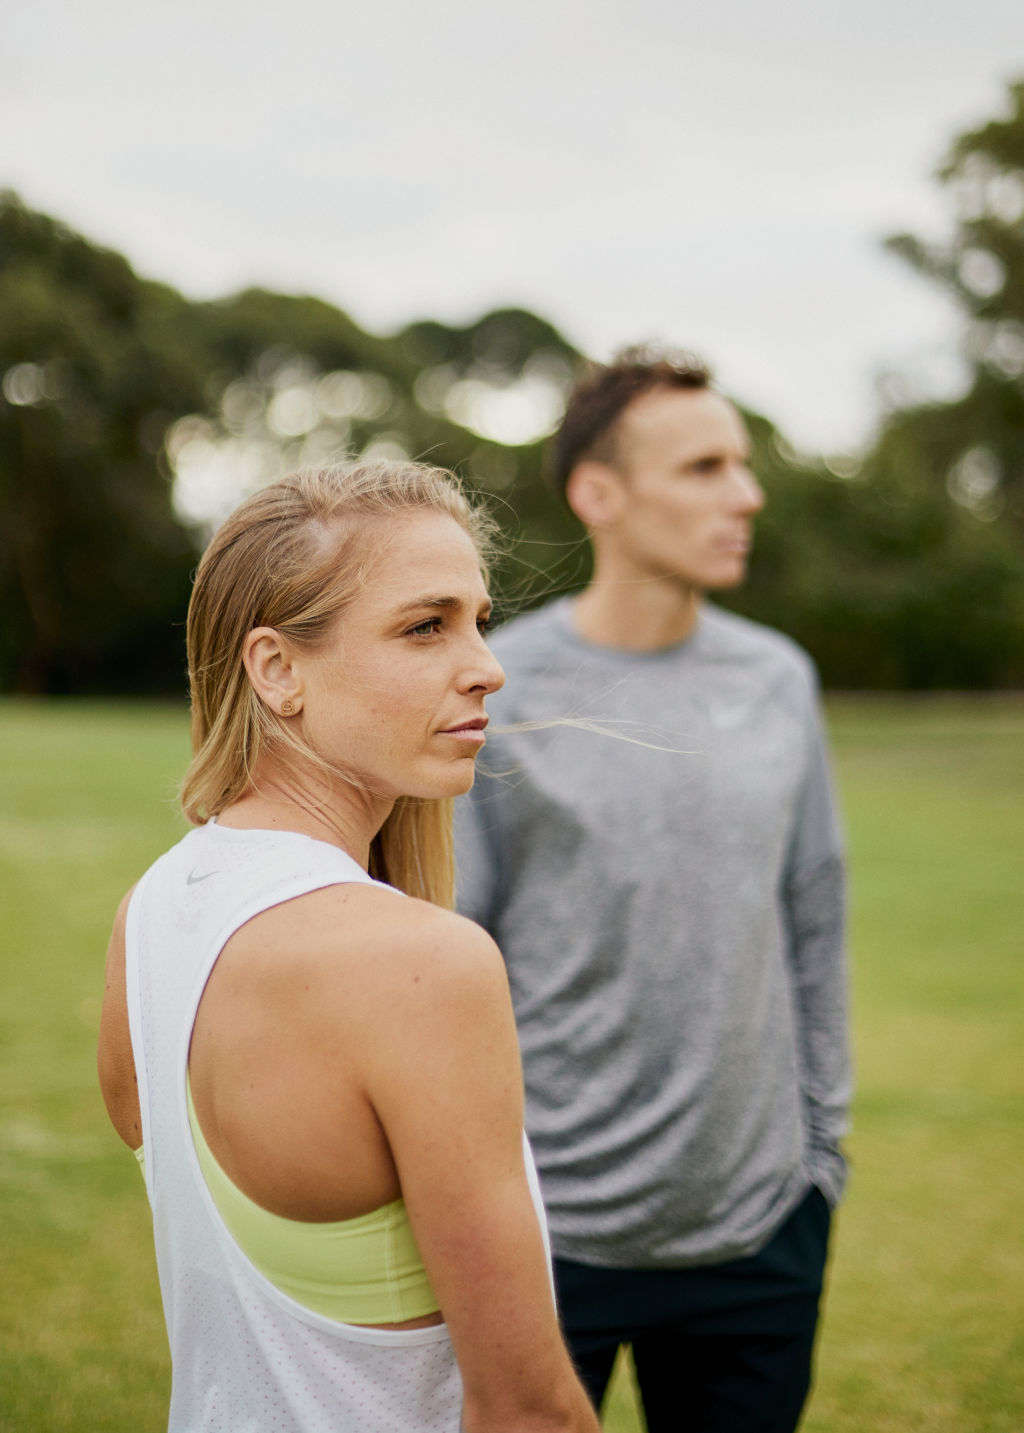 Melbourne runners Gen LaCaze and Ryan Gregson make the most of the Tokyo Games delay